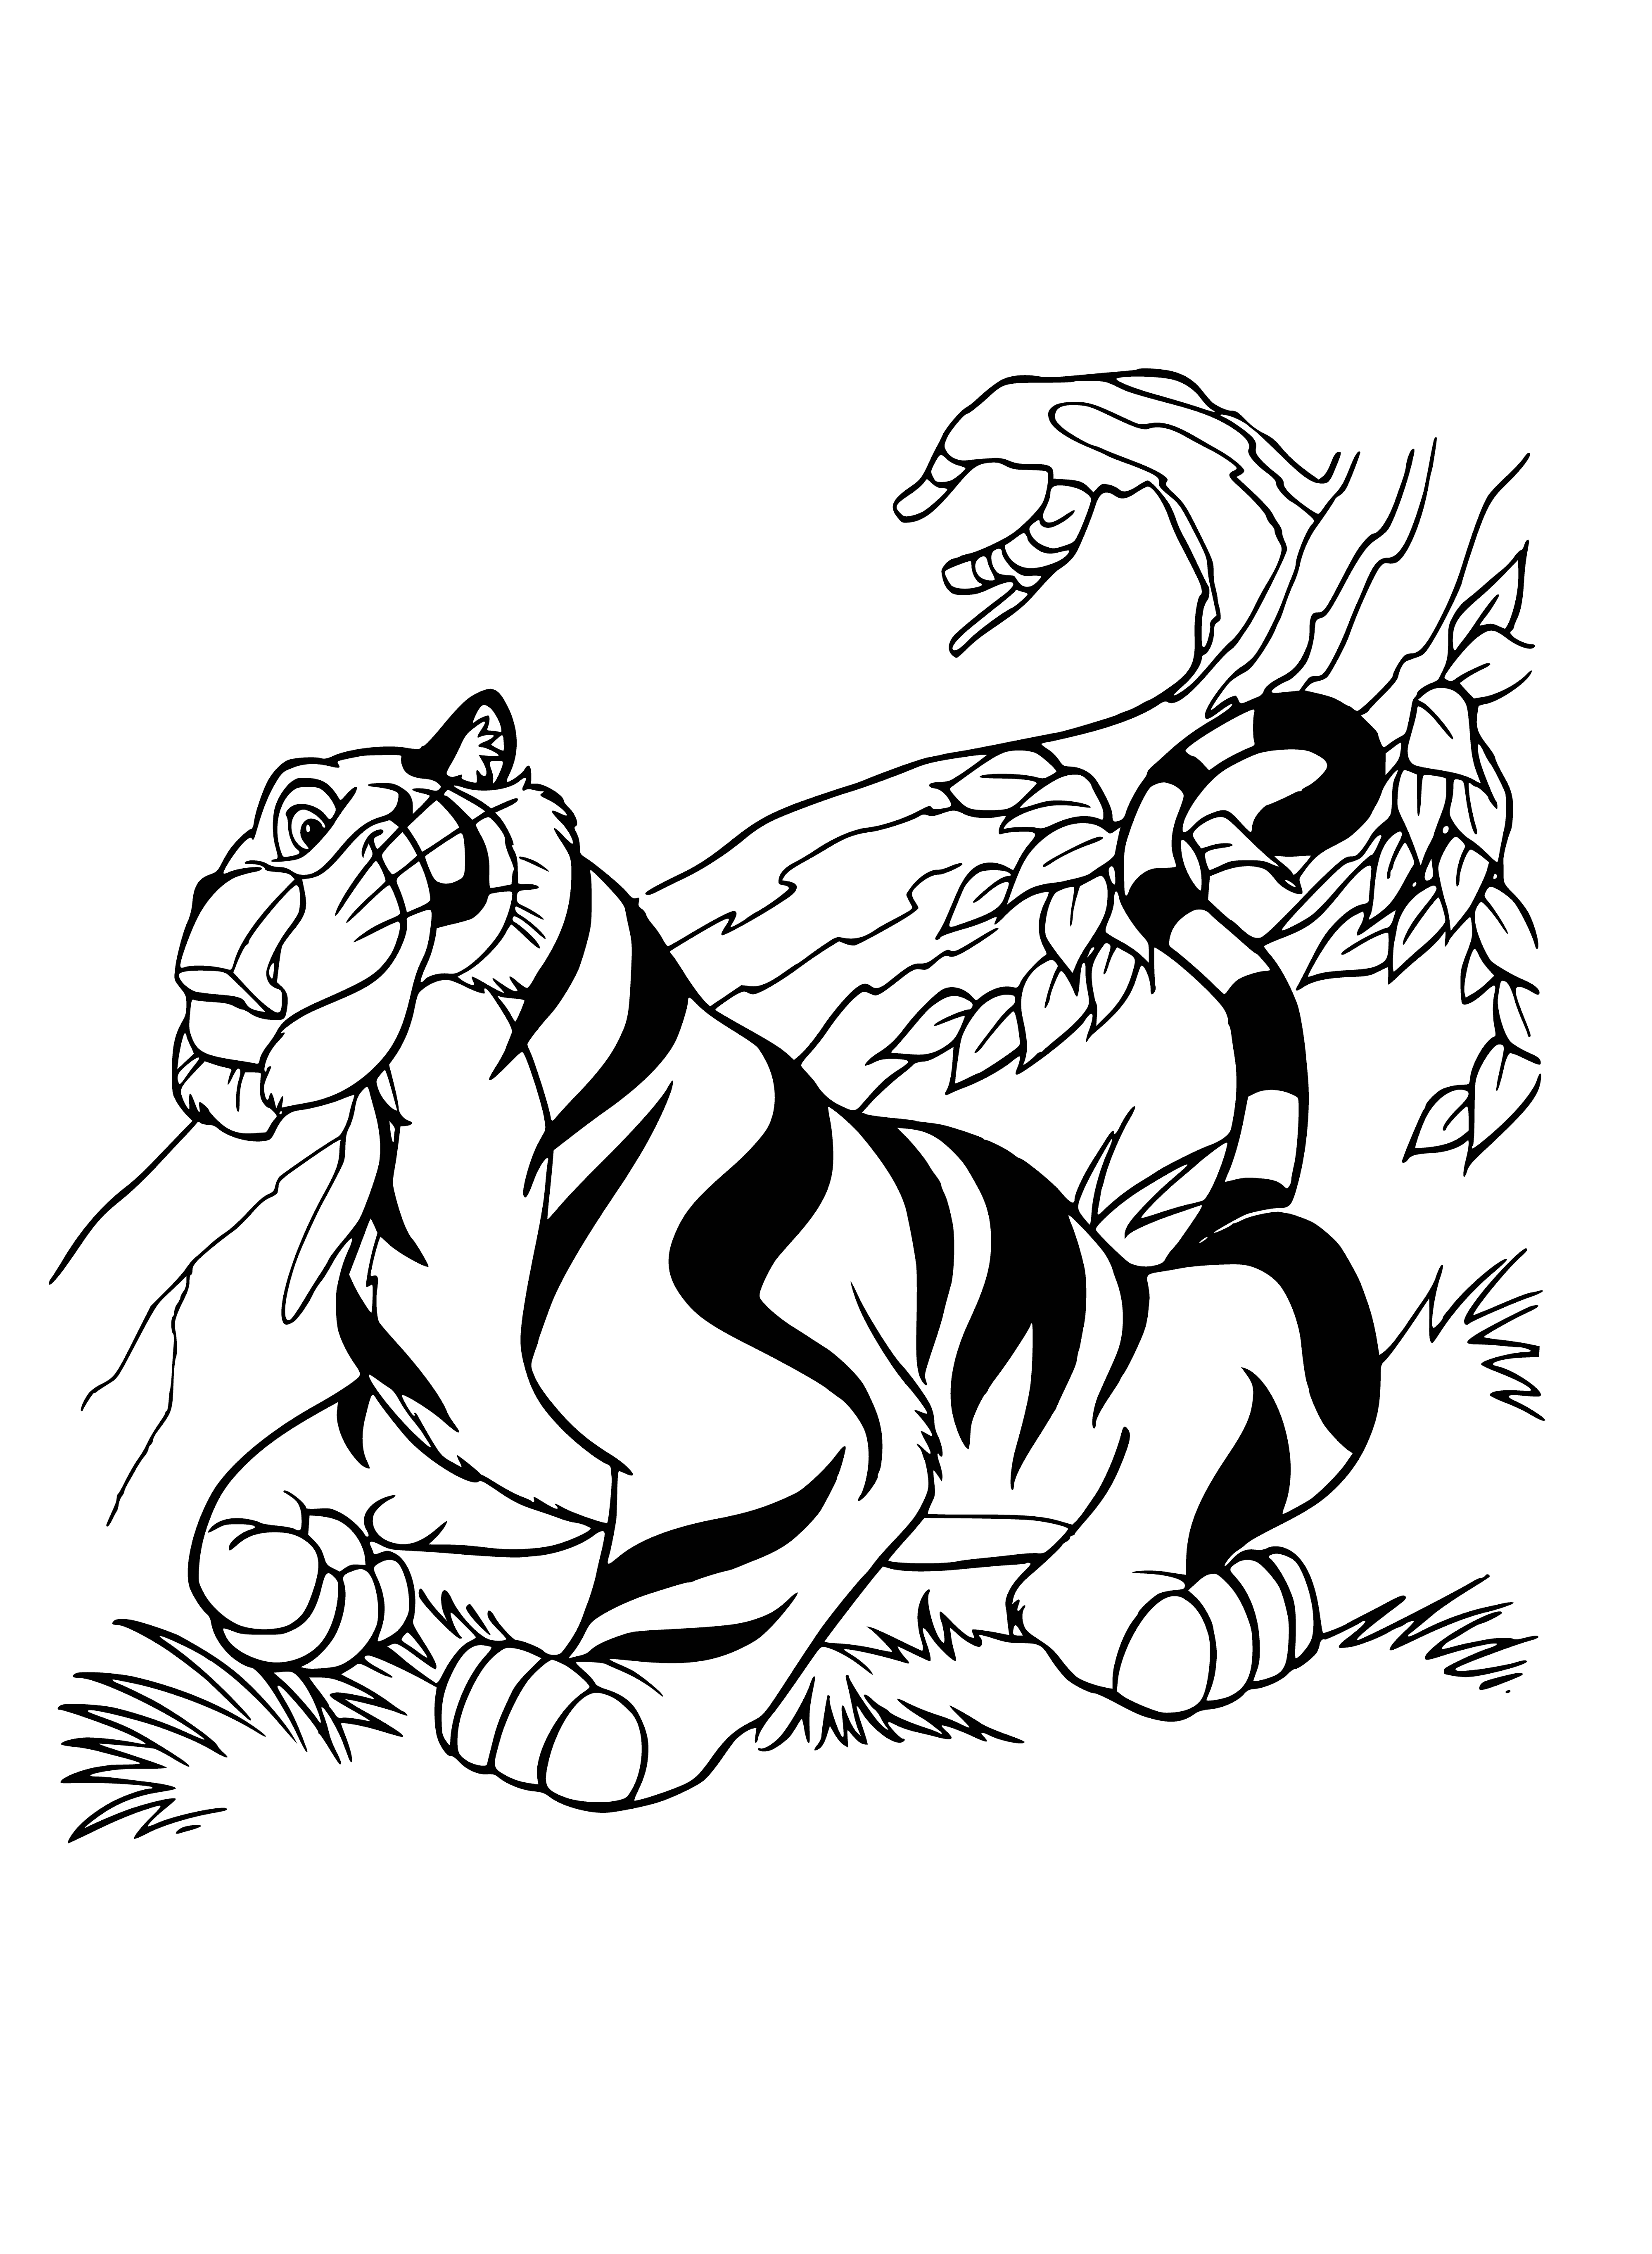 coloring page: Woman stands before tiger in purple, gold outfit. A delightful, majestic sight!